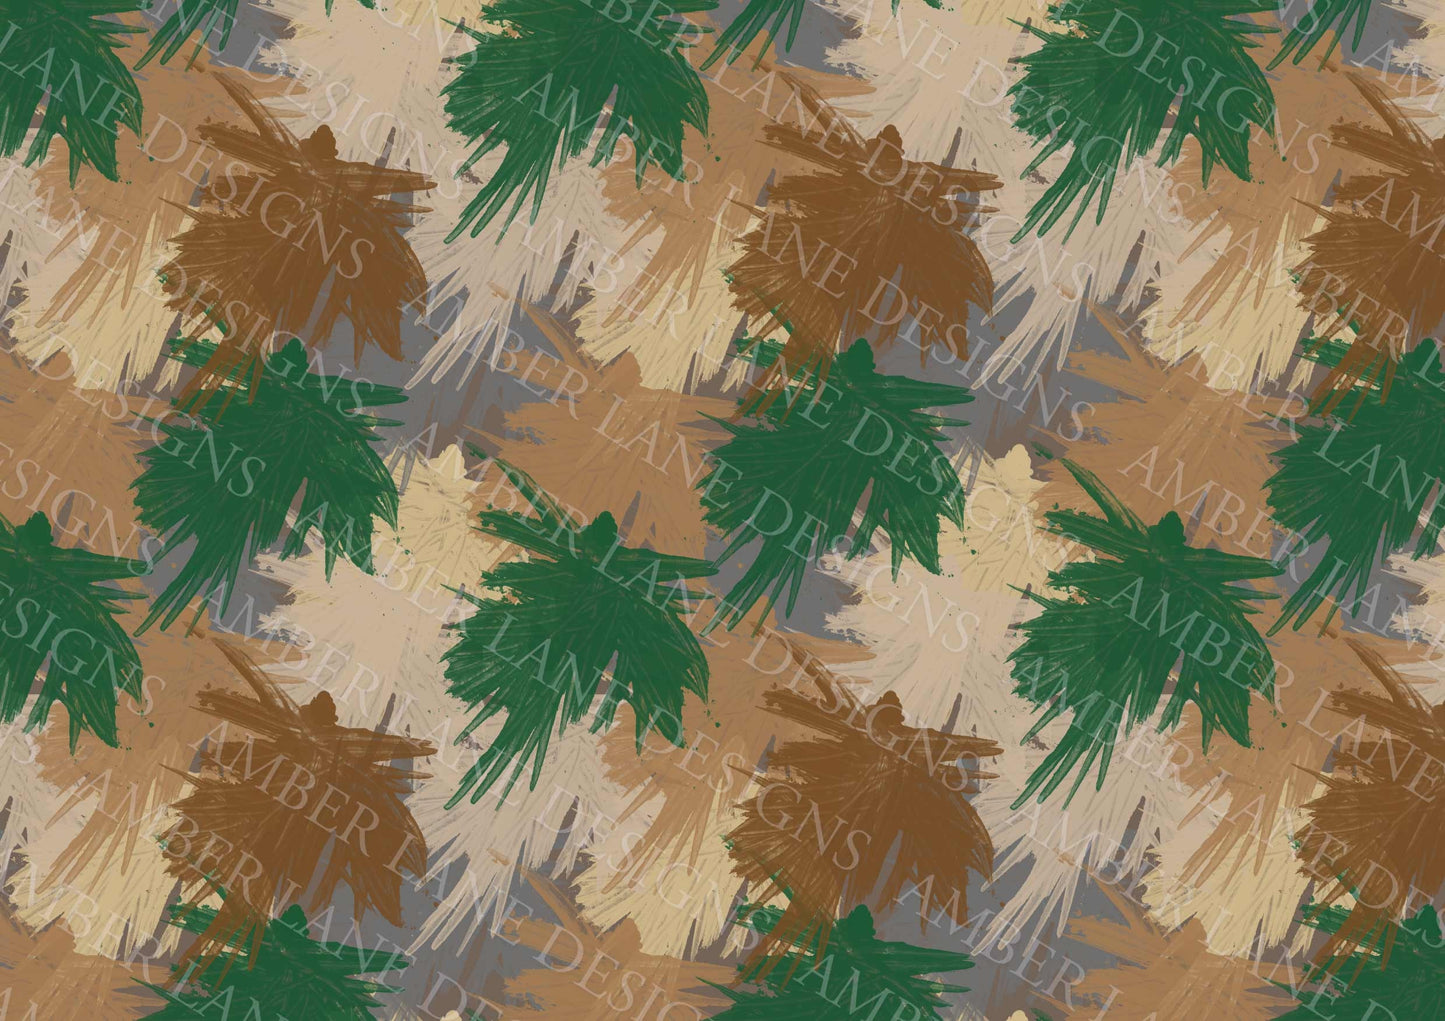 SEAMLESS Camouflage Paper 12x12 inches, jpeg file.